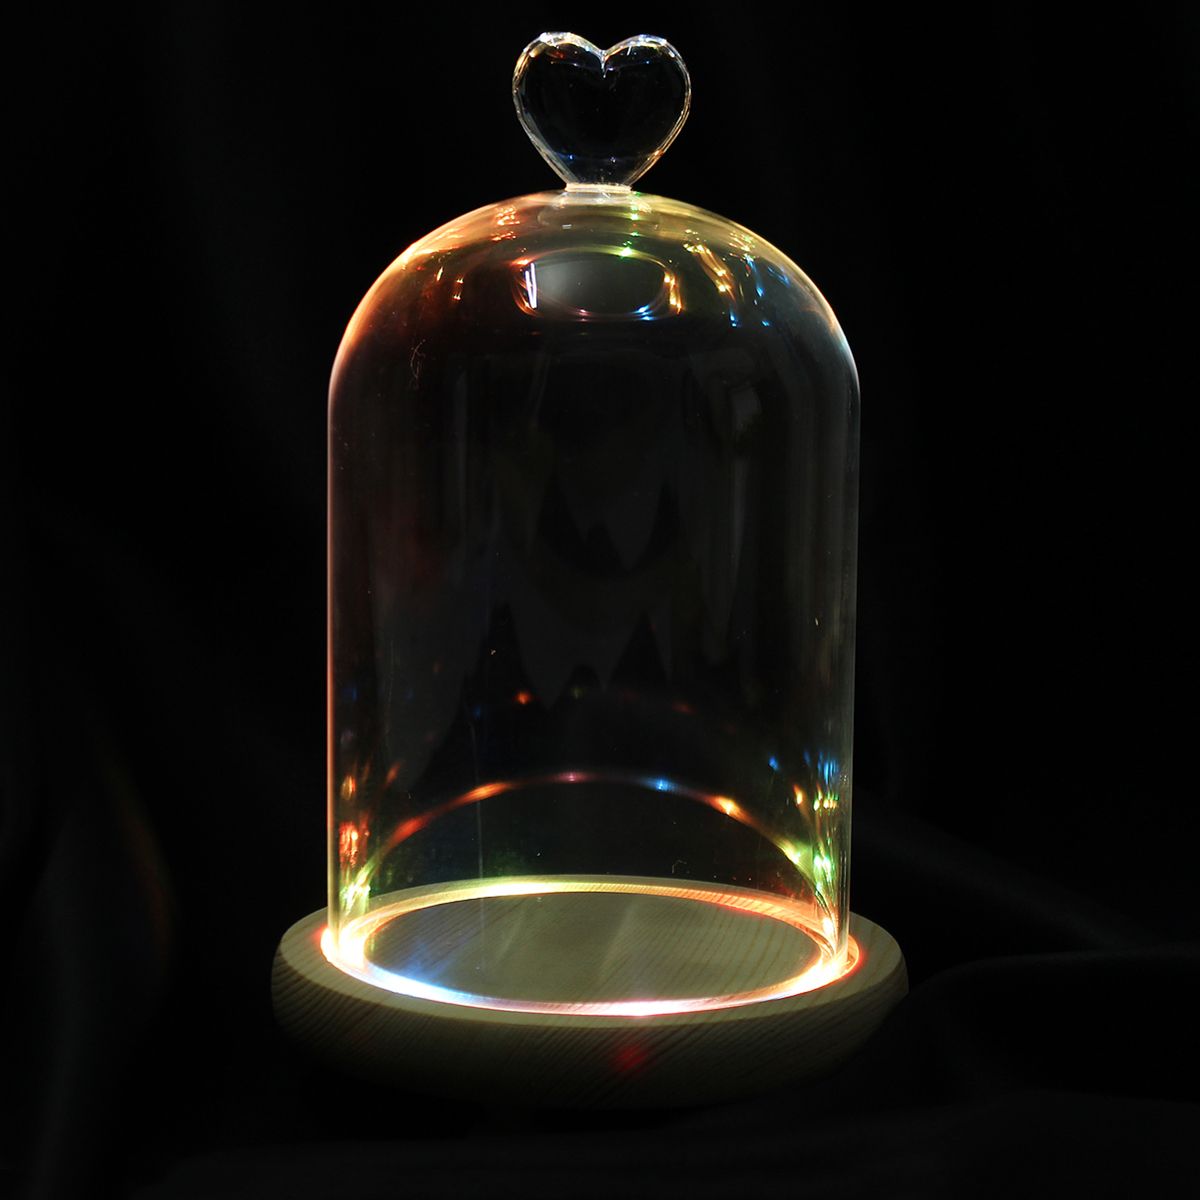 Clear-Glass-Display-Flower-Dome-Bell-Jar-Cloche-Wooden-Base-With-LED-Light-Room-Decorations-1372891